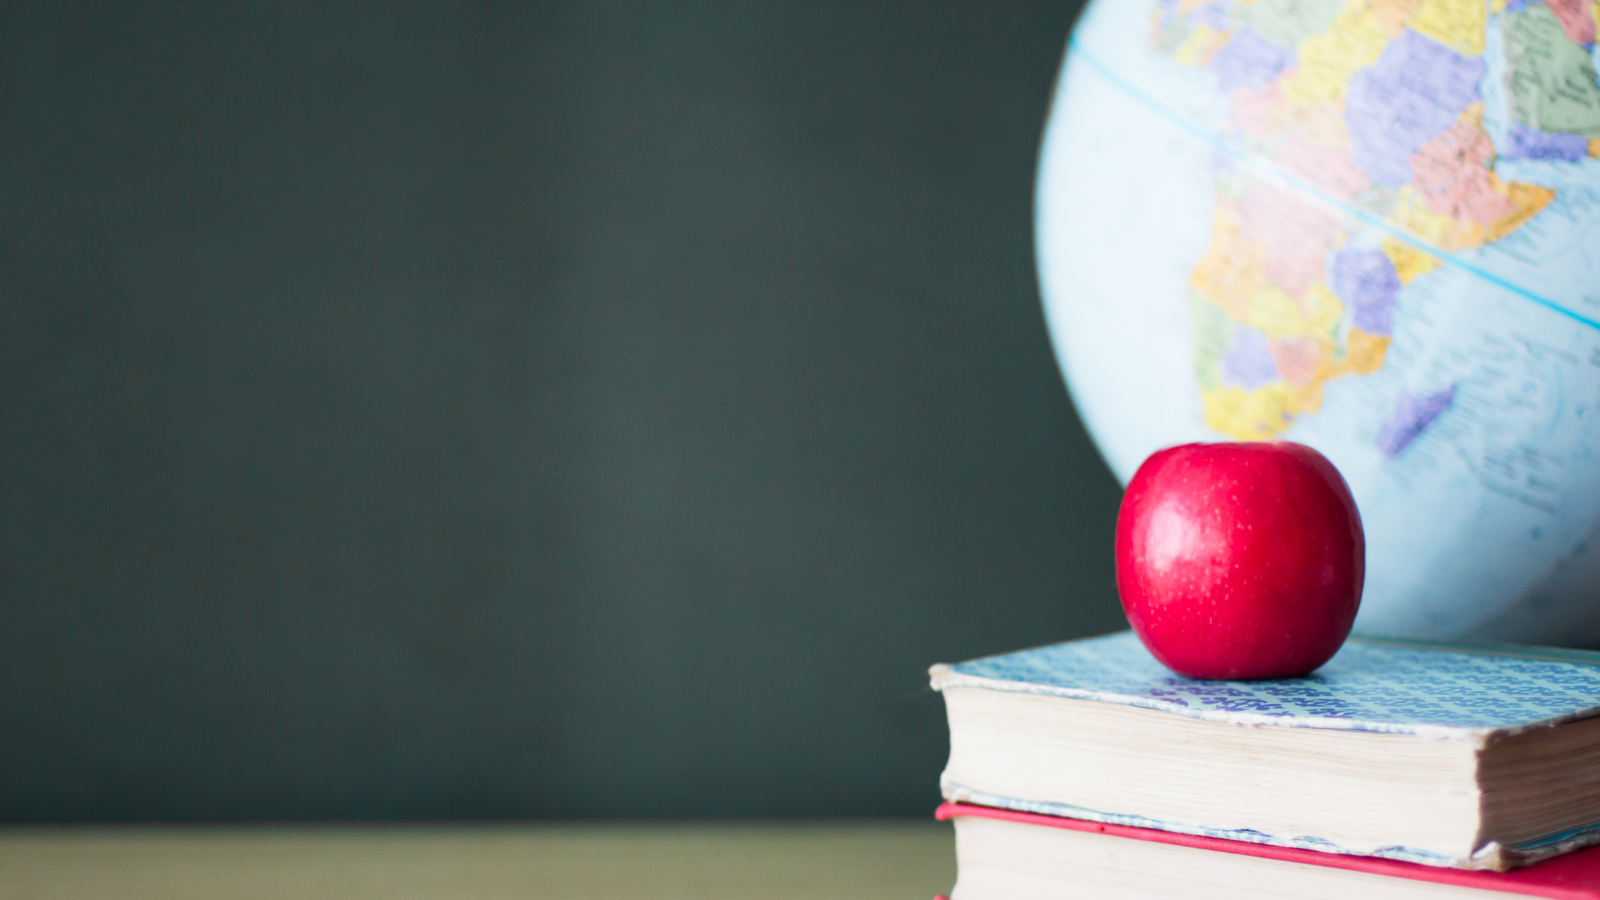 Image showing Globe, red apple and books